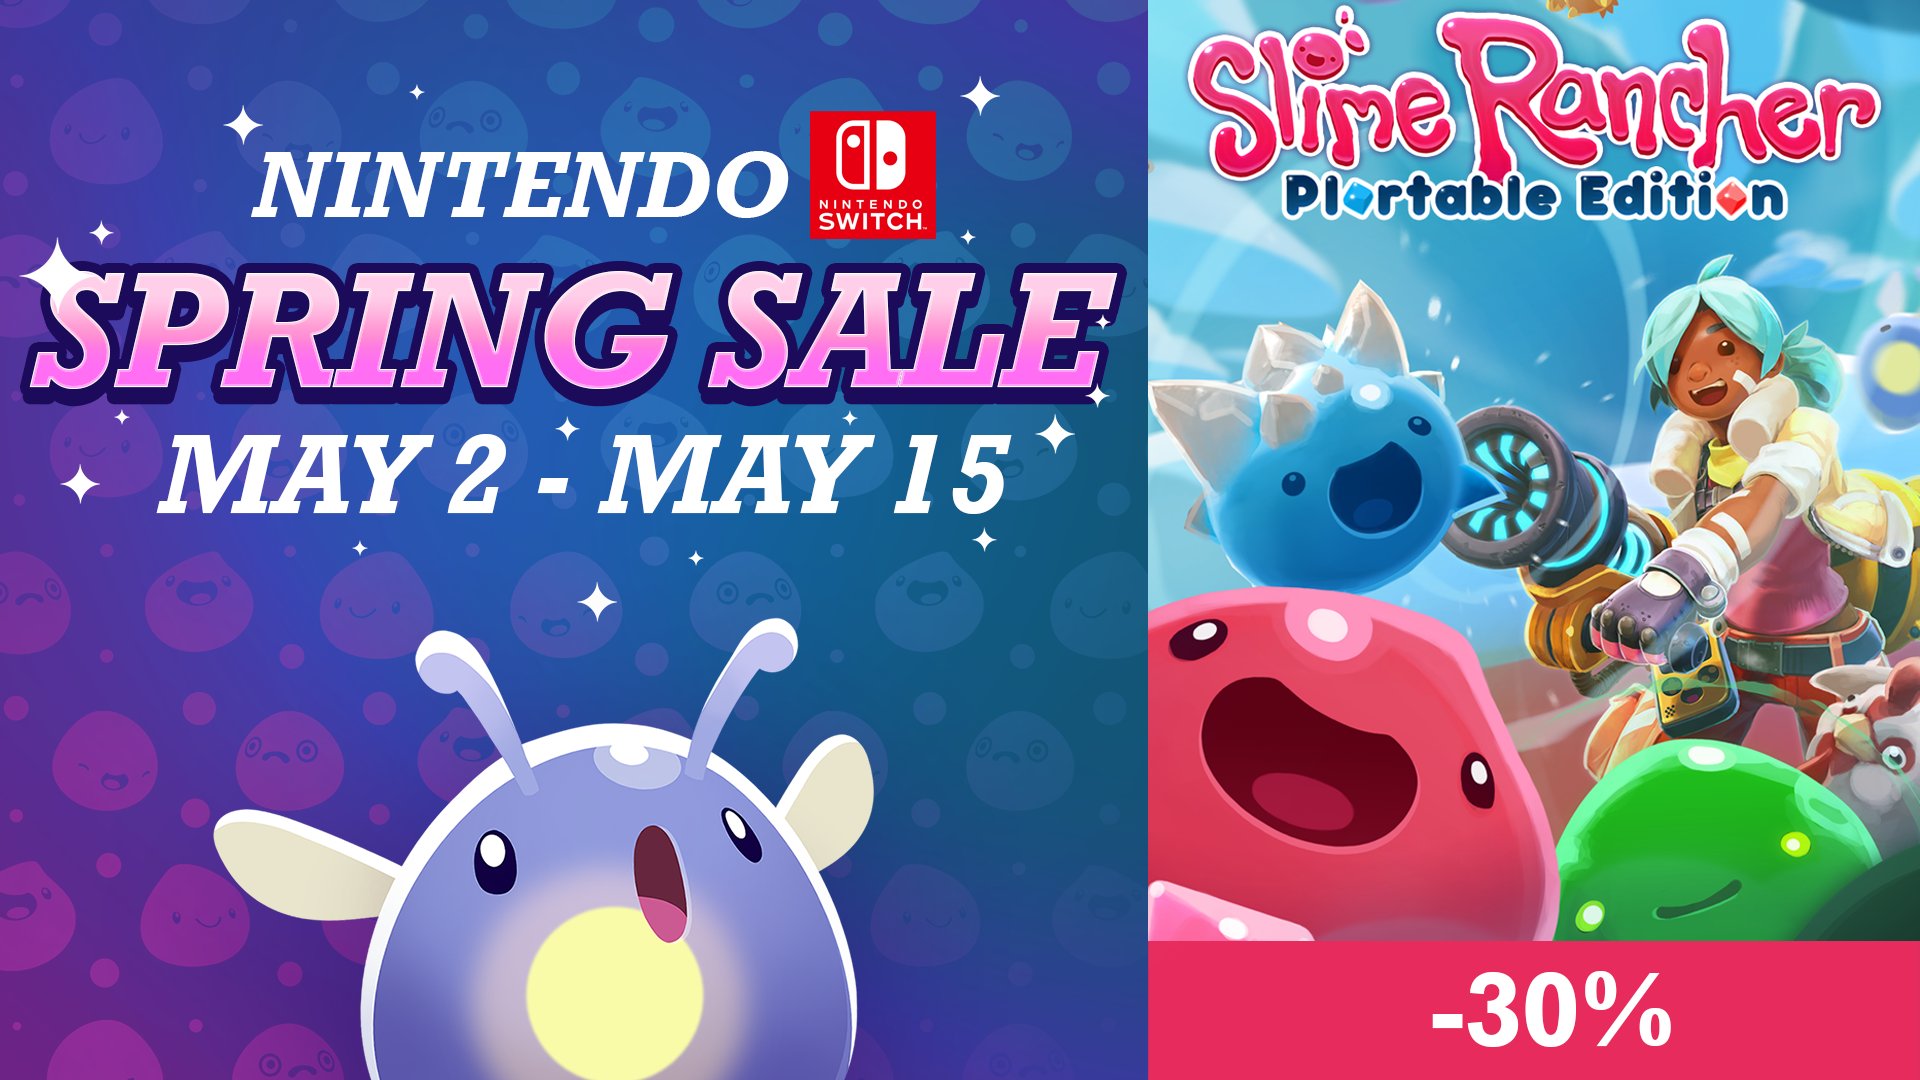 Rancher on Twitter: "Slime Rancher: Plortable Edition is on sale NOW through May 15 for 30% off on the Nintendo Switch! Get plortable and ranch on the gooo!!! 📢🌀 https://t.co/Cu1Ego3NKR https://t.co/5zMqWP6NBt" /